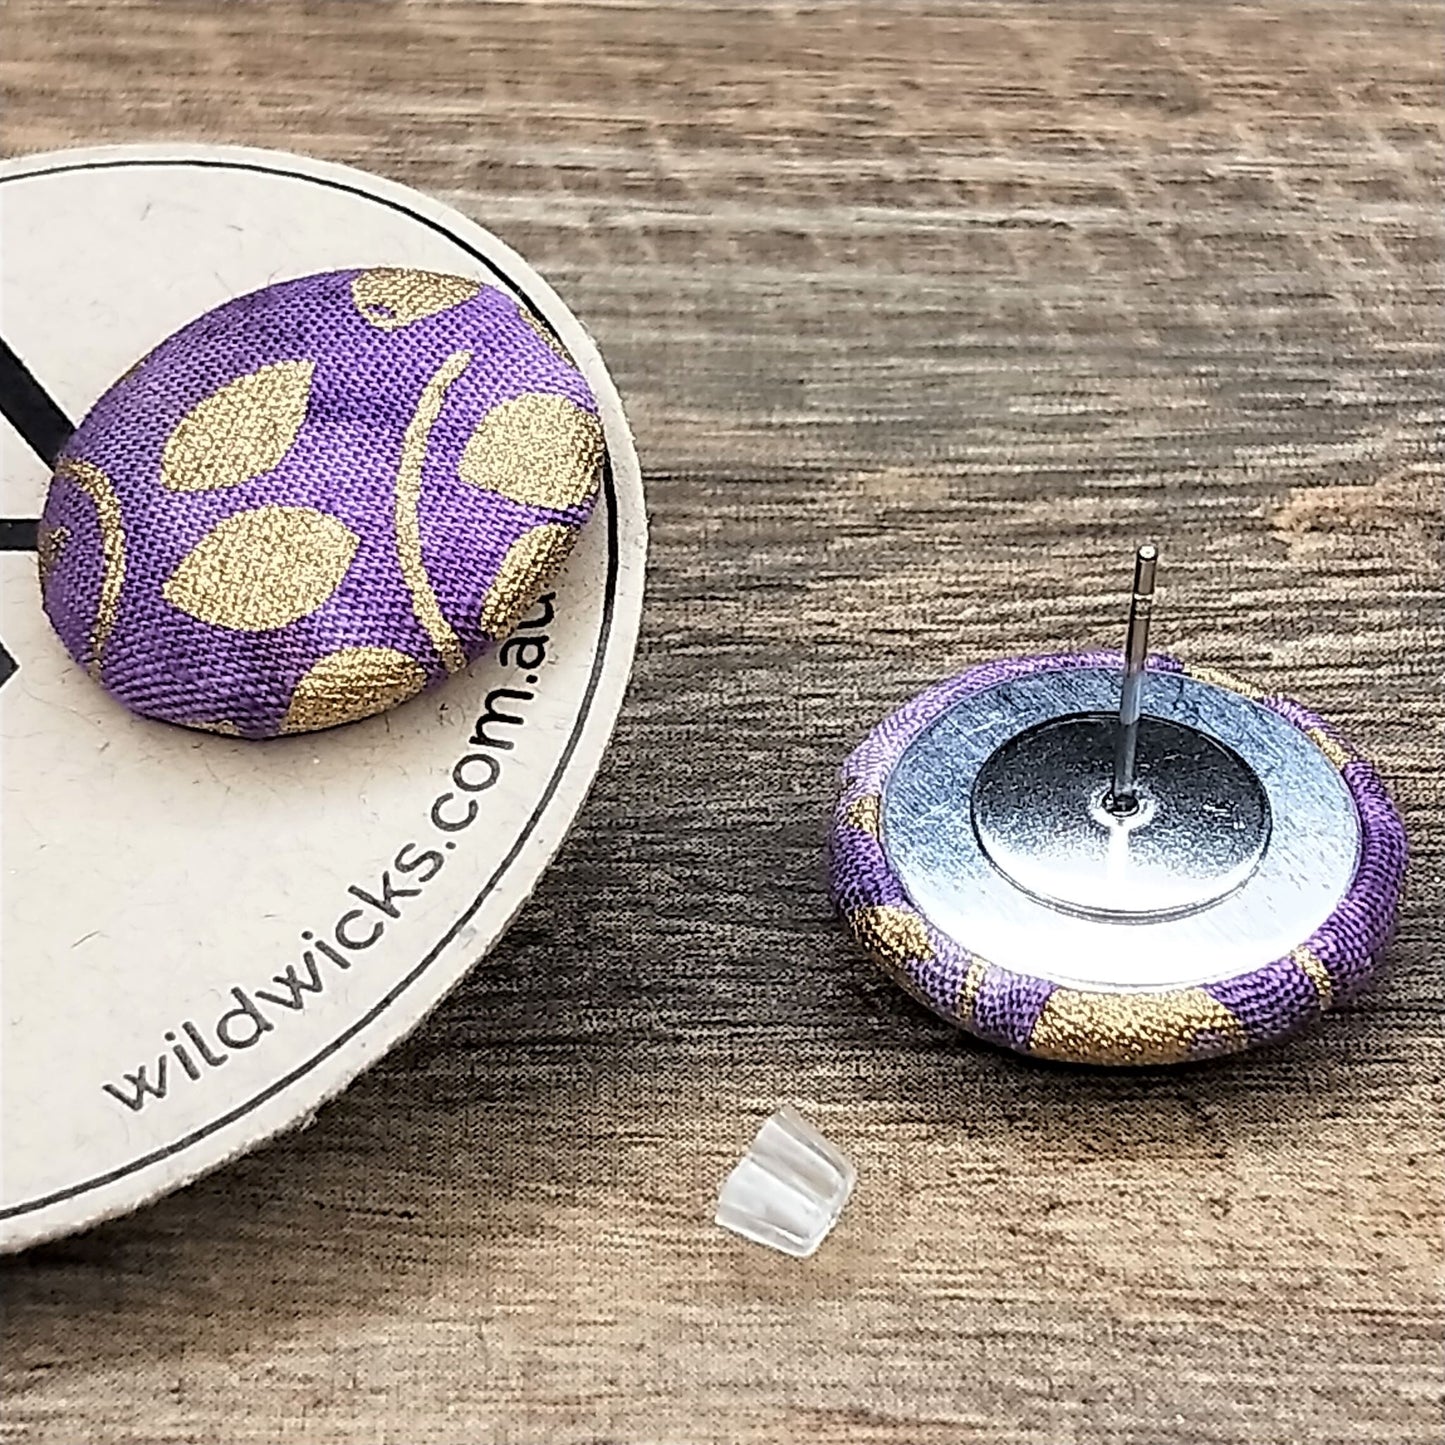 Wildears Fabric Covered Button Earrings Gold Leaf Purple 19mm